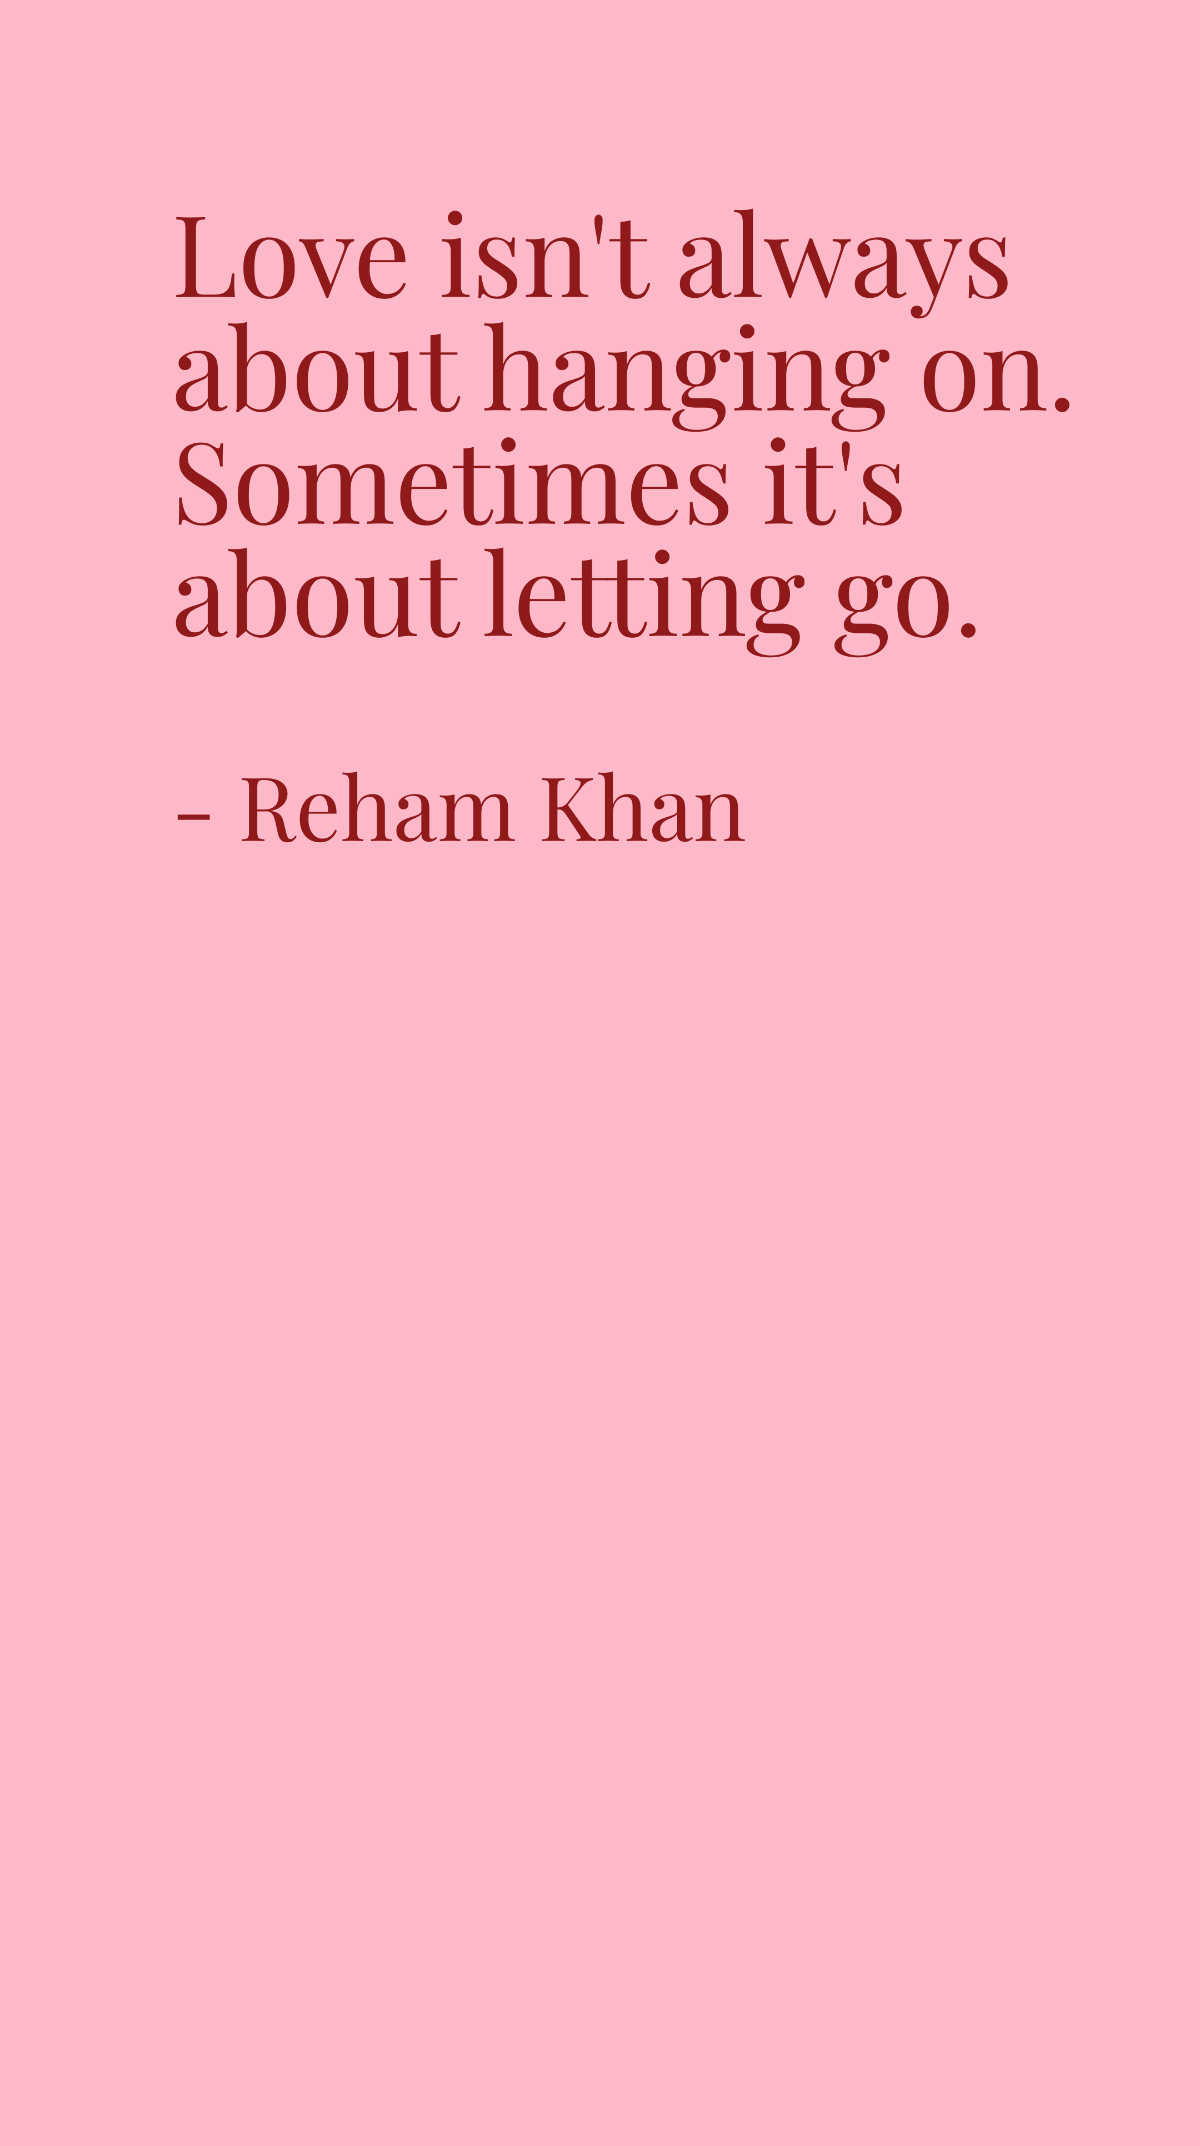 Free Reham Khan - Love isn't always about hanging on. Sometimes it's about letting go. Template